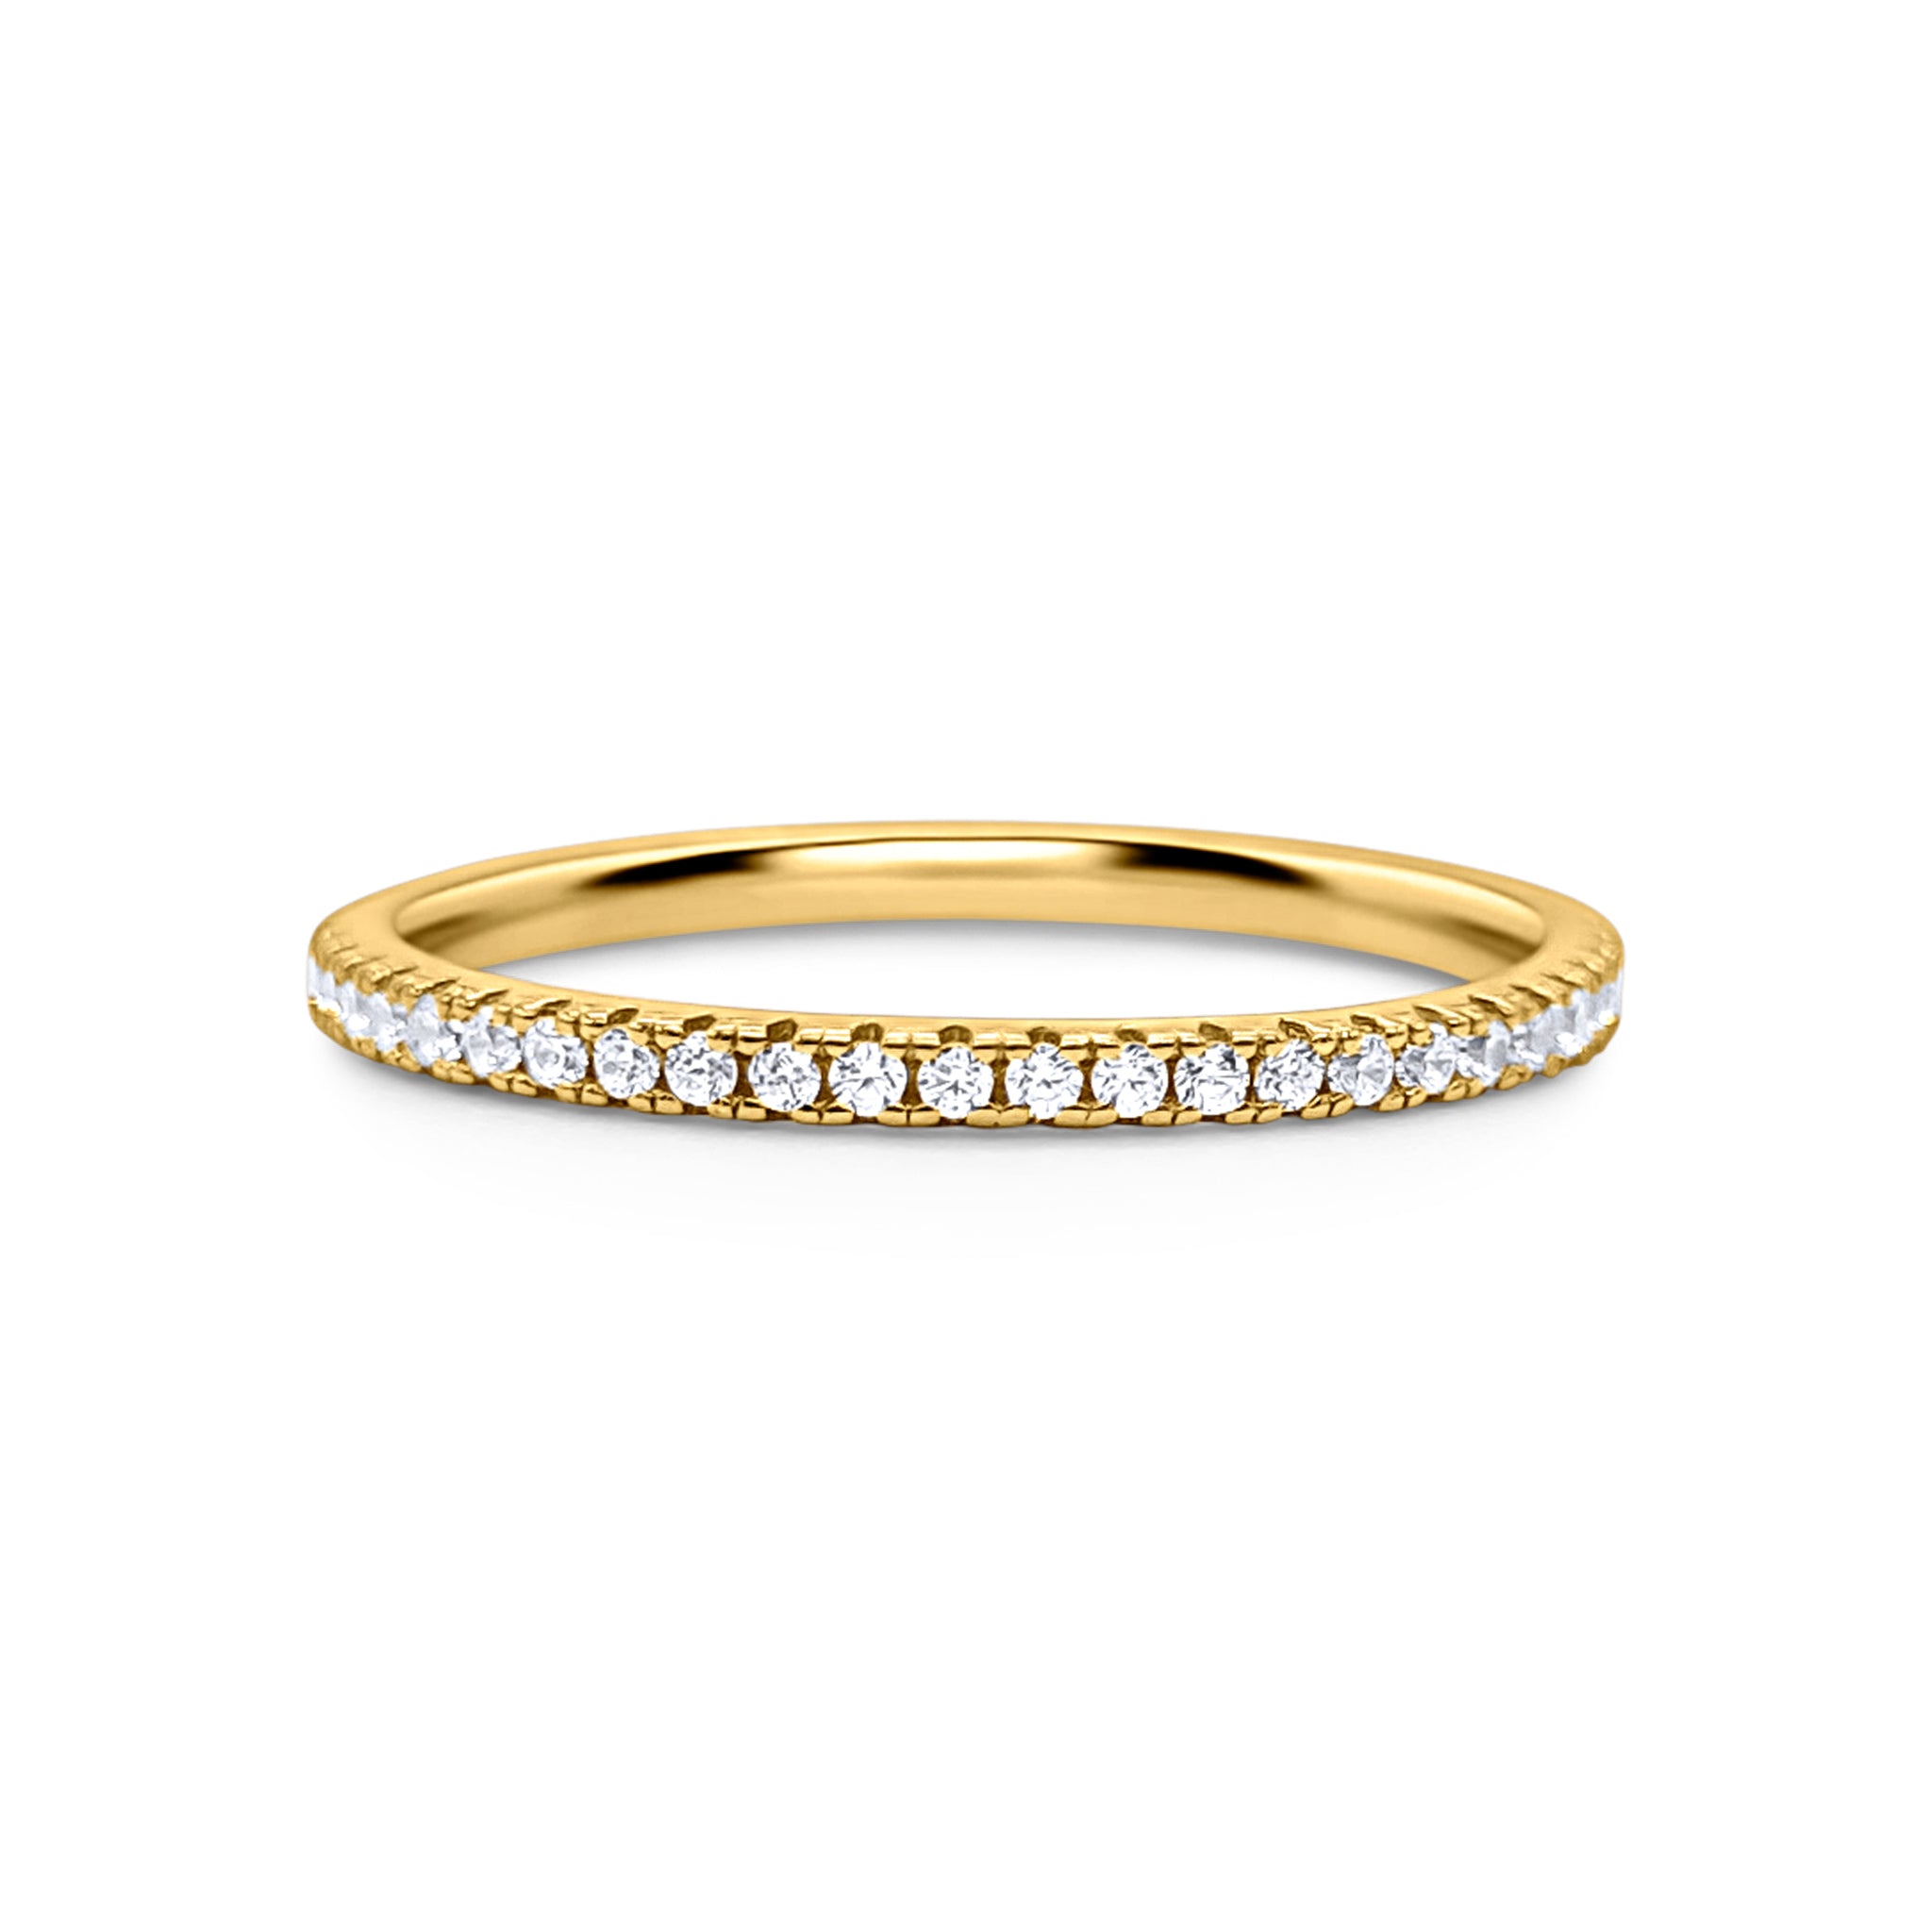 18k Gold Plated Sterling Silver Full Band Eternity Ring (Thin Band) - Stackable, Minimalist, Dainty Ring, Birthday, Anniversary, Gift For Her, Wedding Band